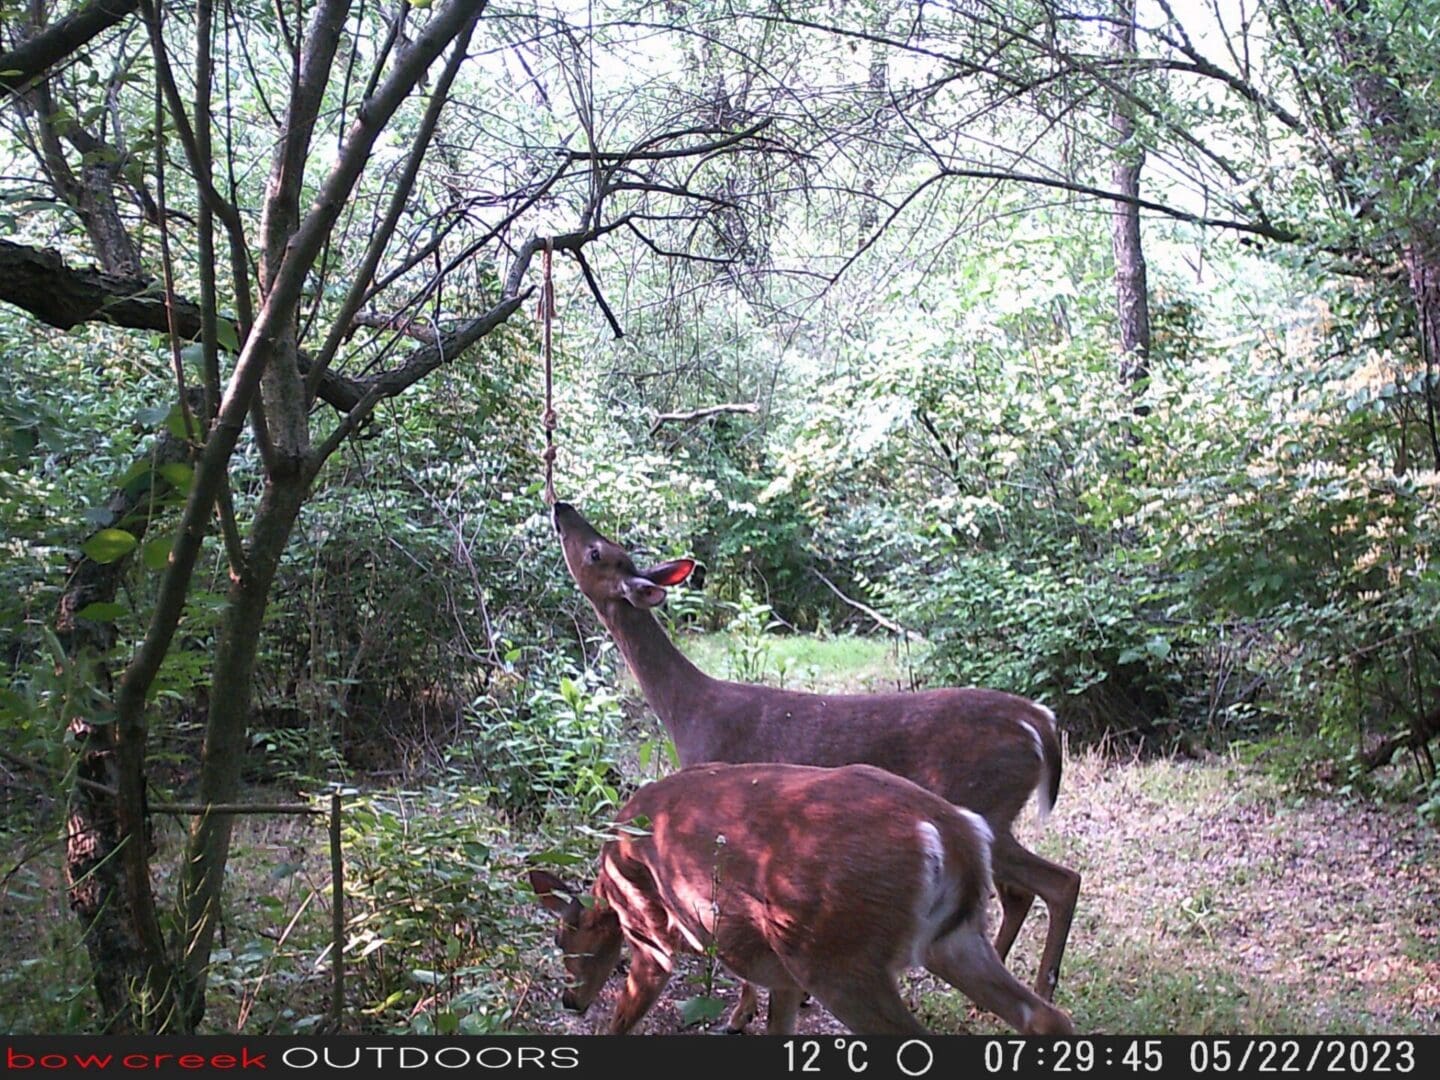 Two deer are grazing in a wooded area.